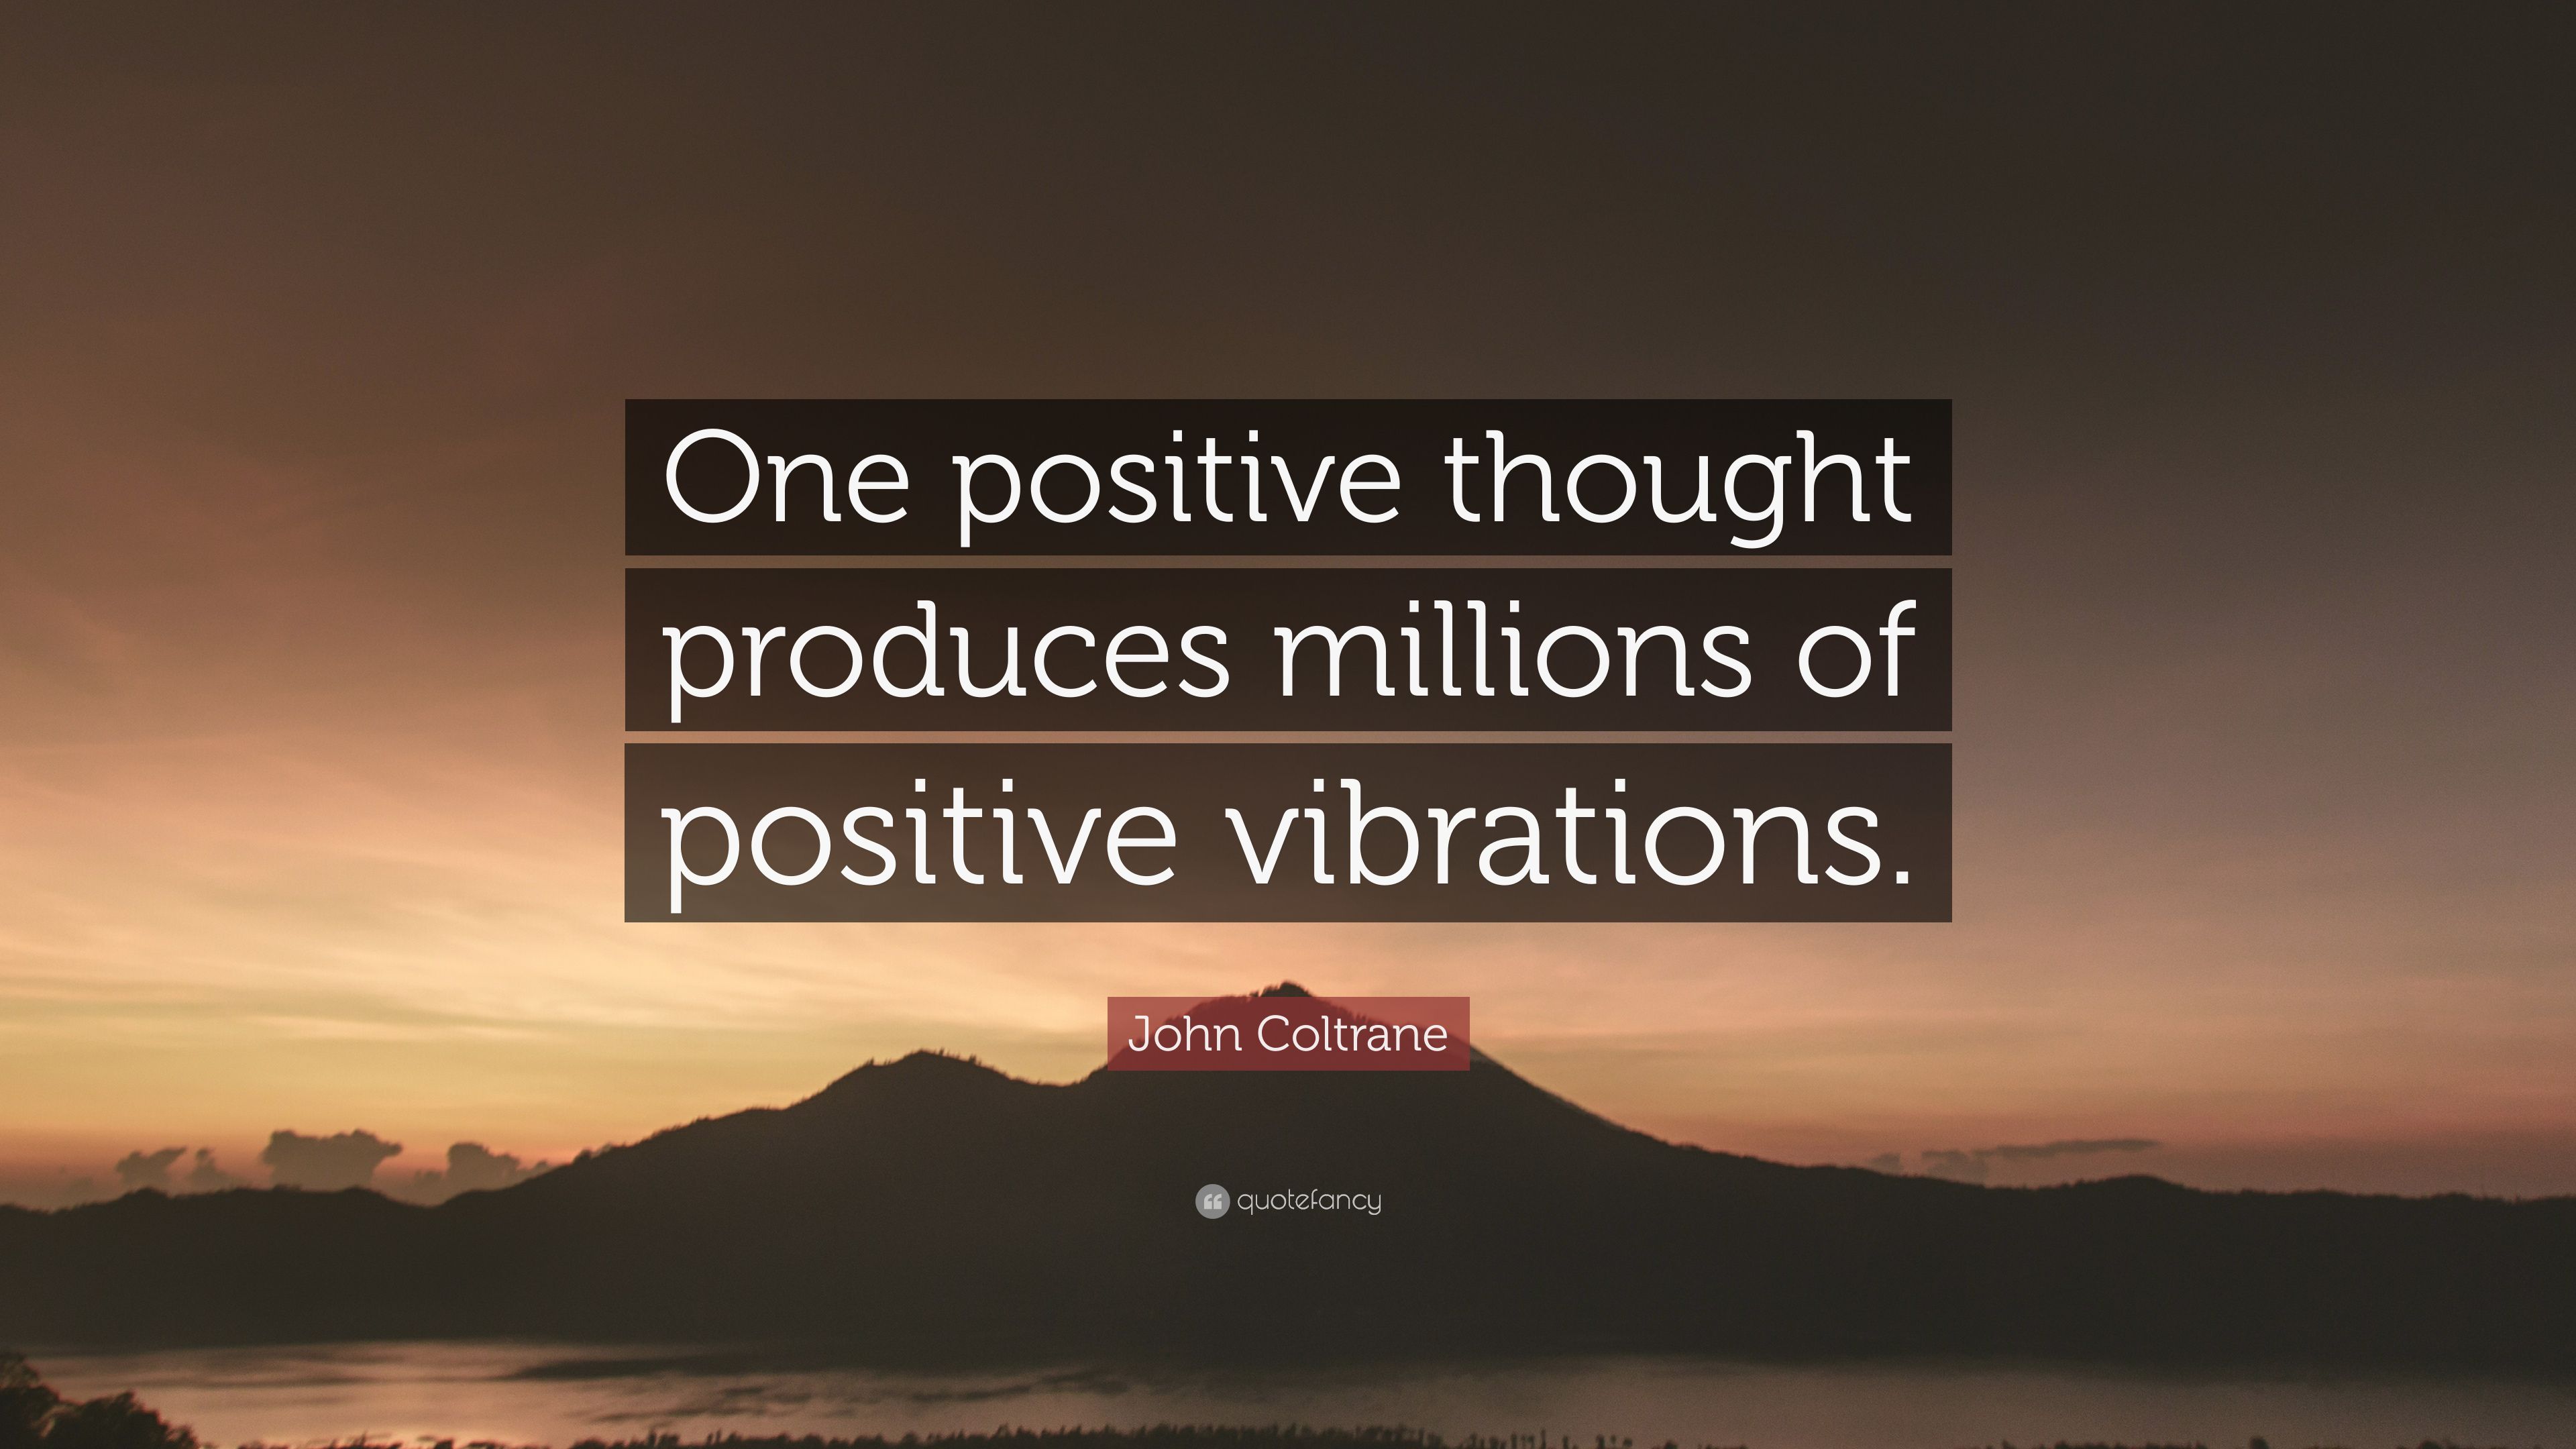 John Coltrane Quote: “One positive thought produces millions of positive vibrations.” (12 wallpaper)